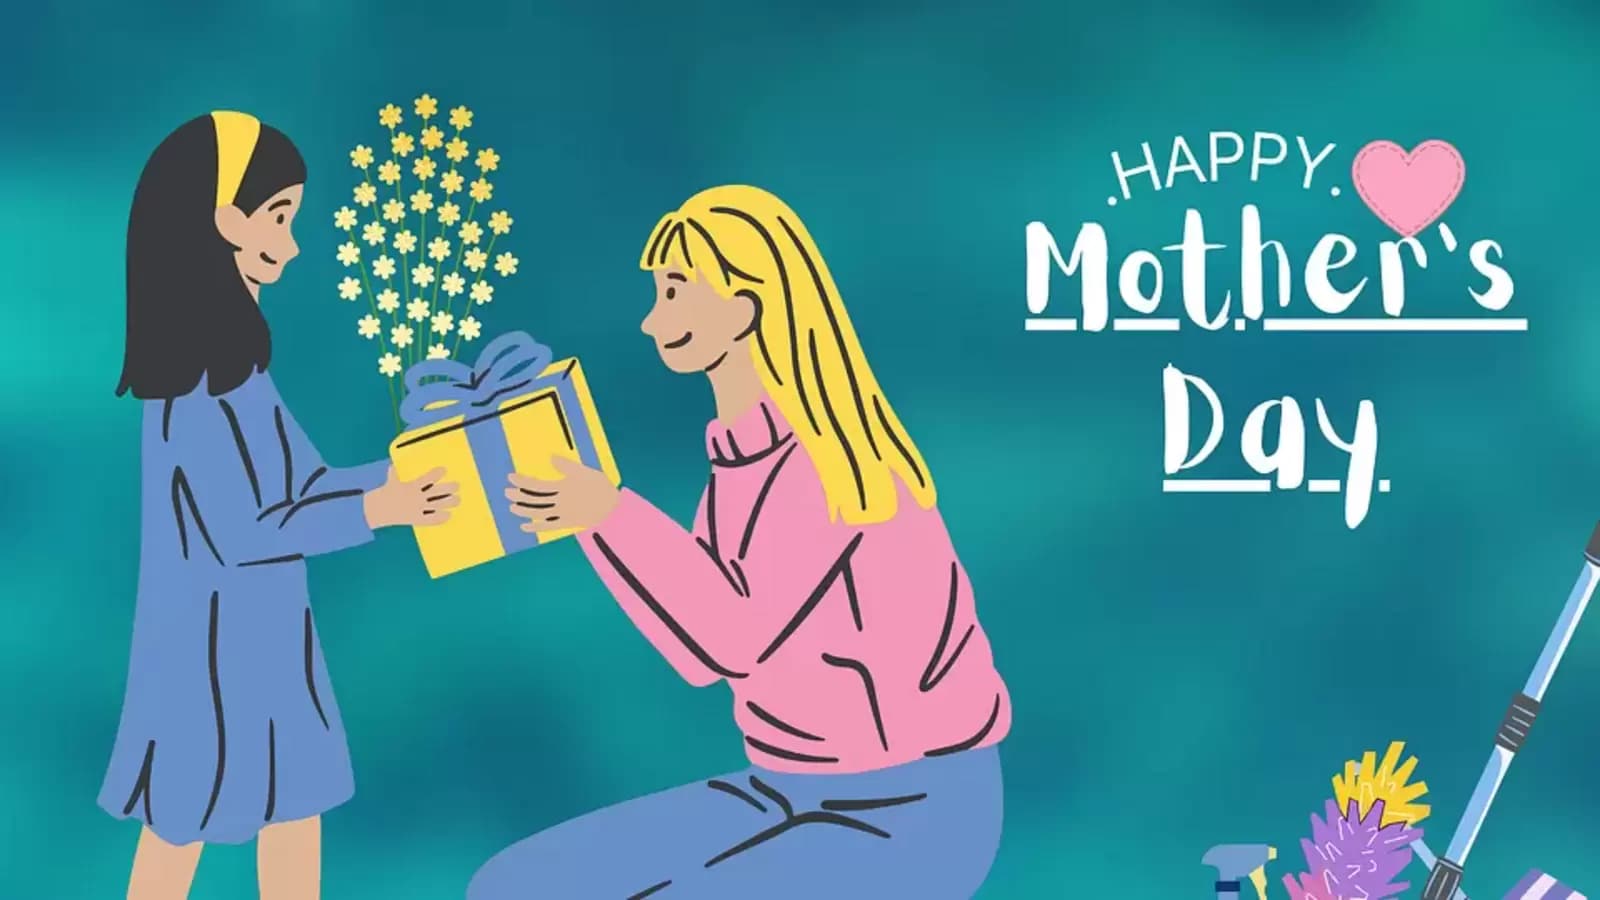 Happy Mother's Day 2022 WhatsApp stickers: How to share Mother's Day  WhatsApp wishes | How-to